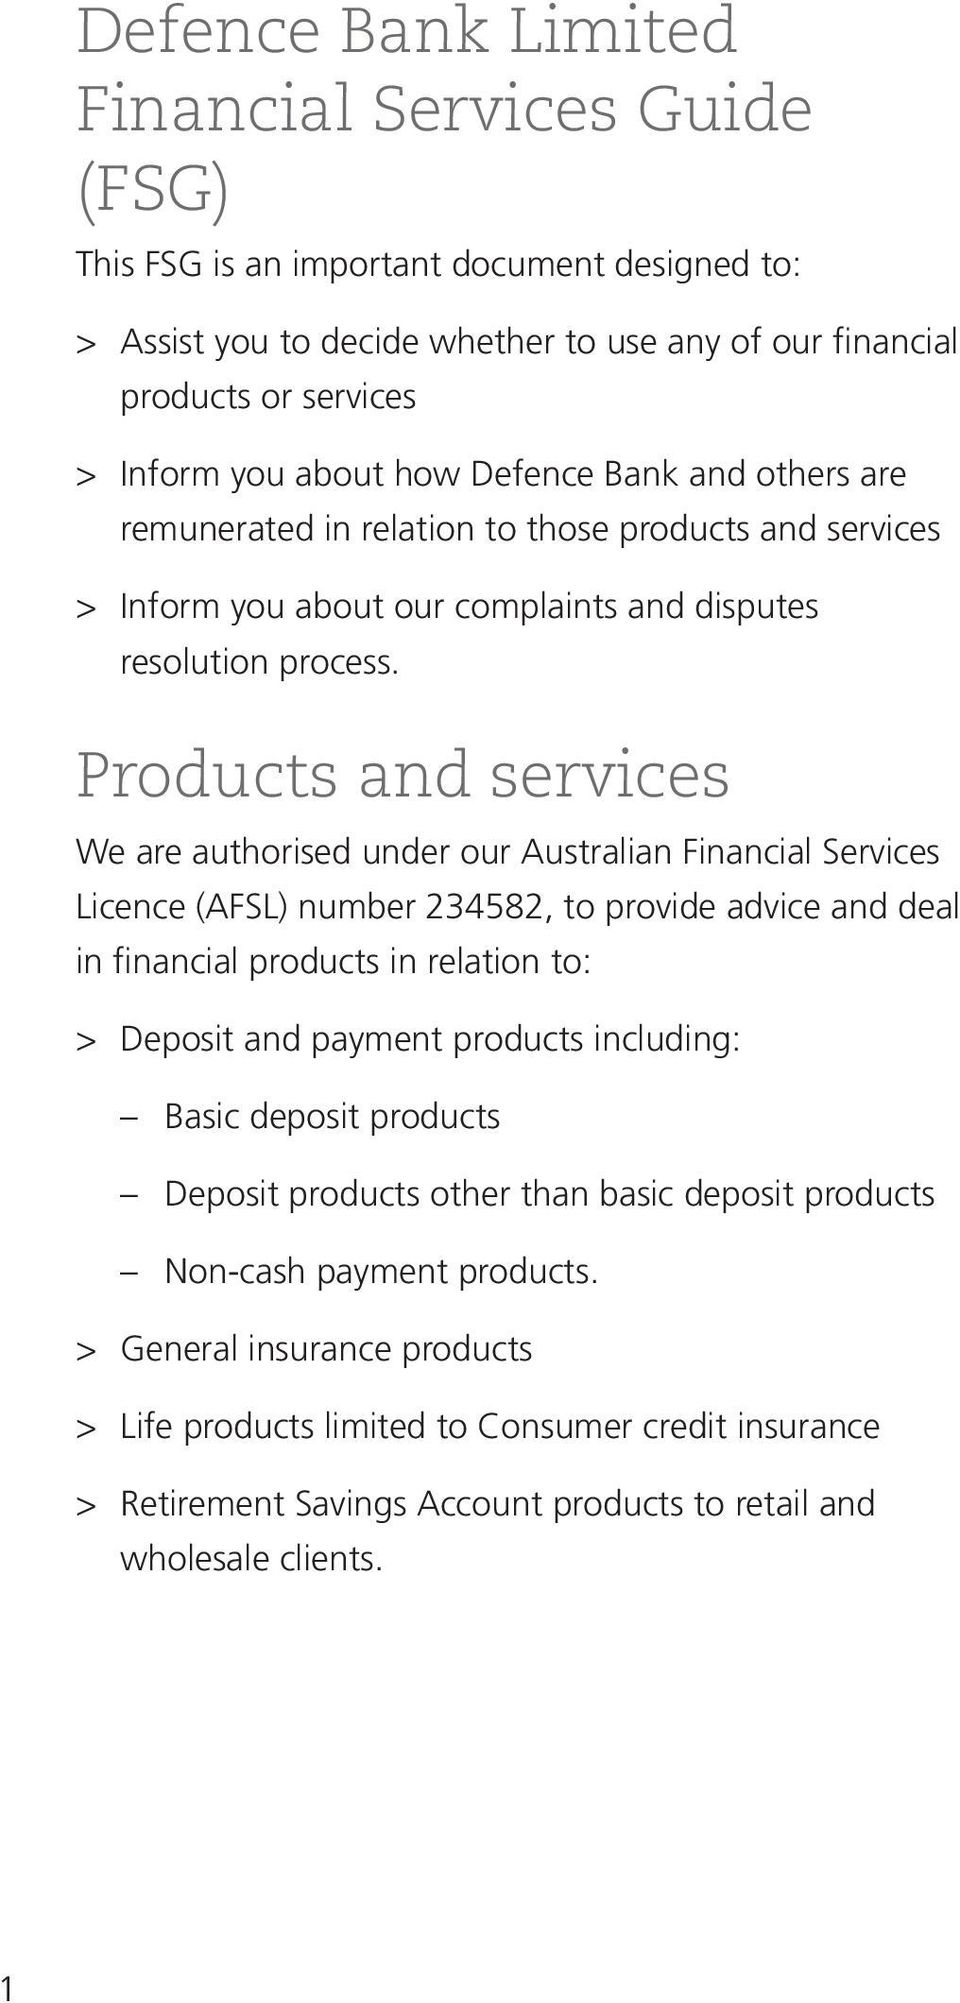 Products and services We are authorised under our Australian Financial Services Licence (AFSL) number 234582, to provide advice and deal in financial products in relation to: Deposit and payment